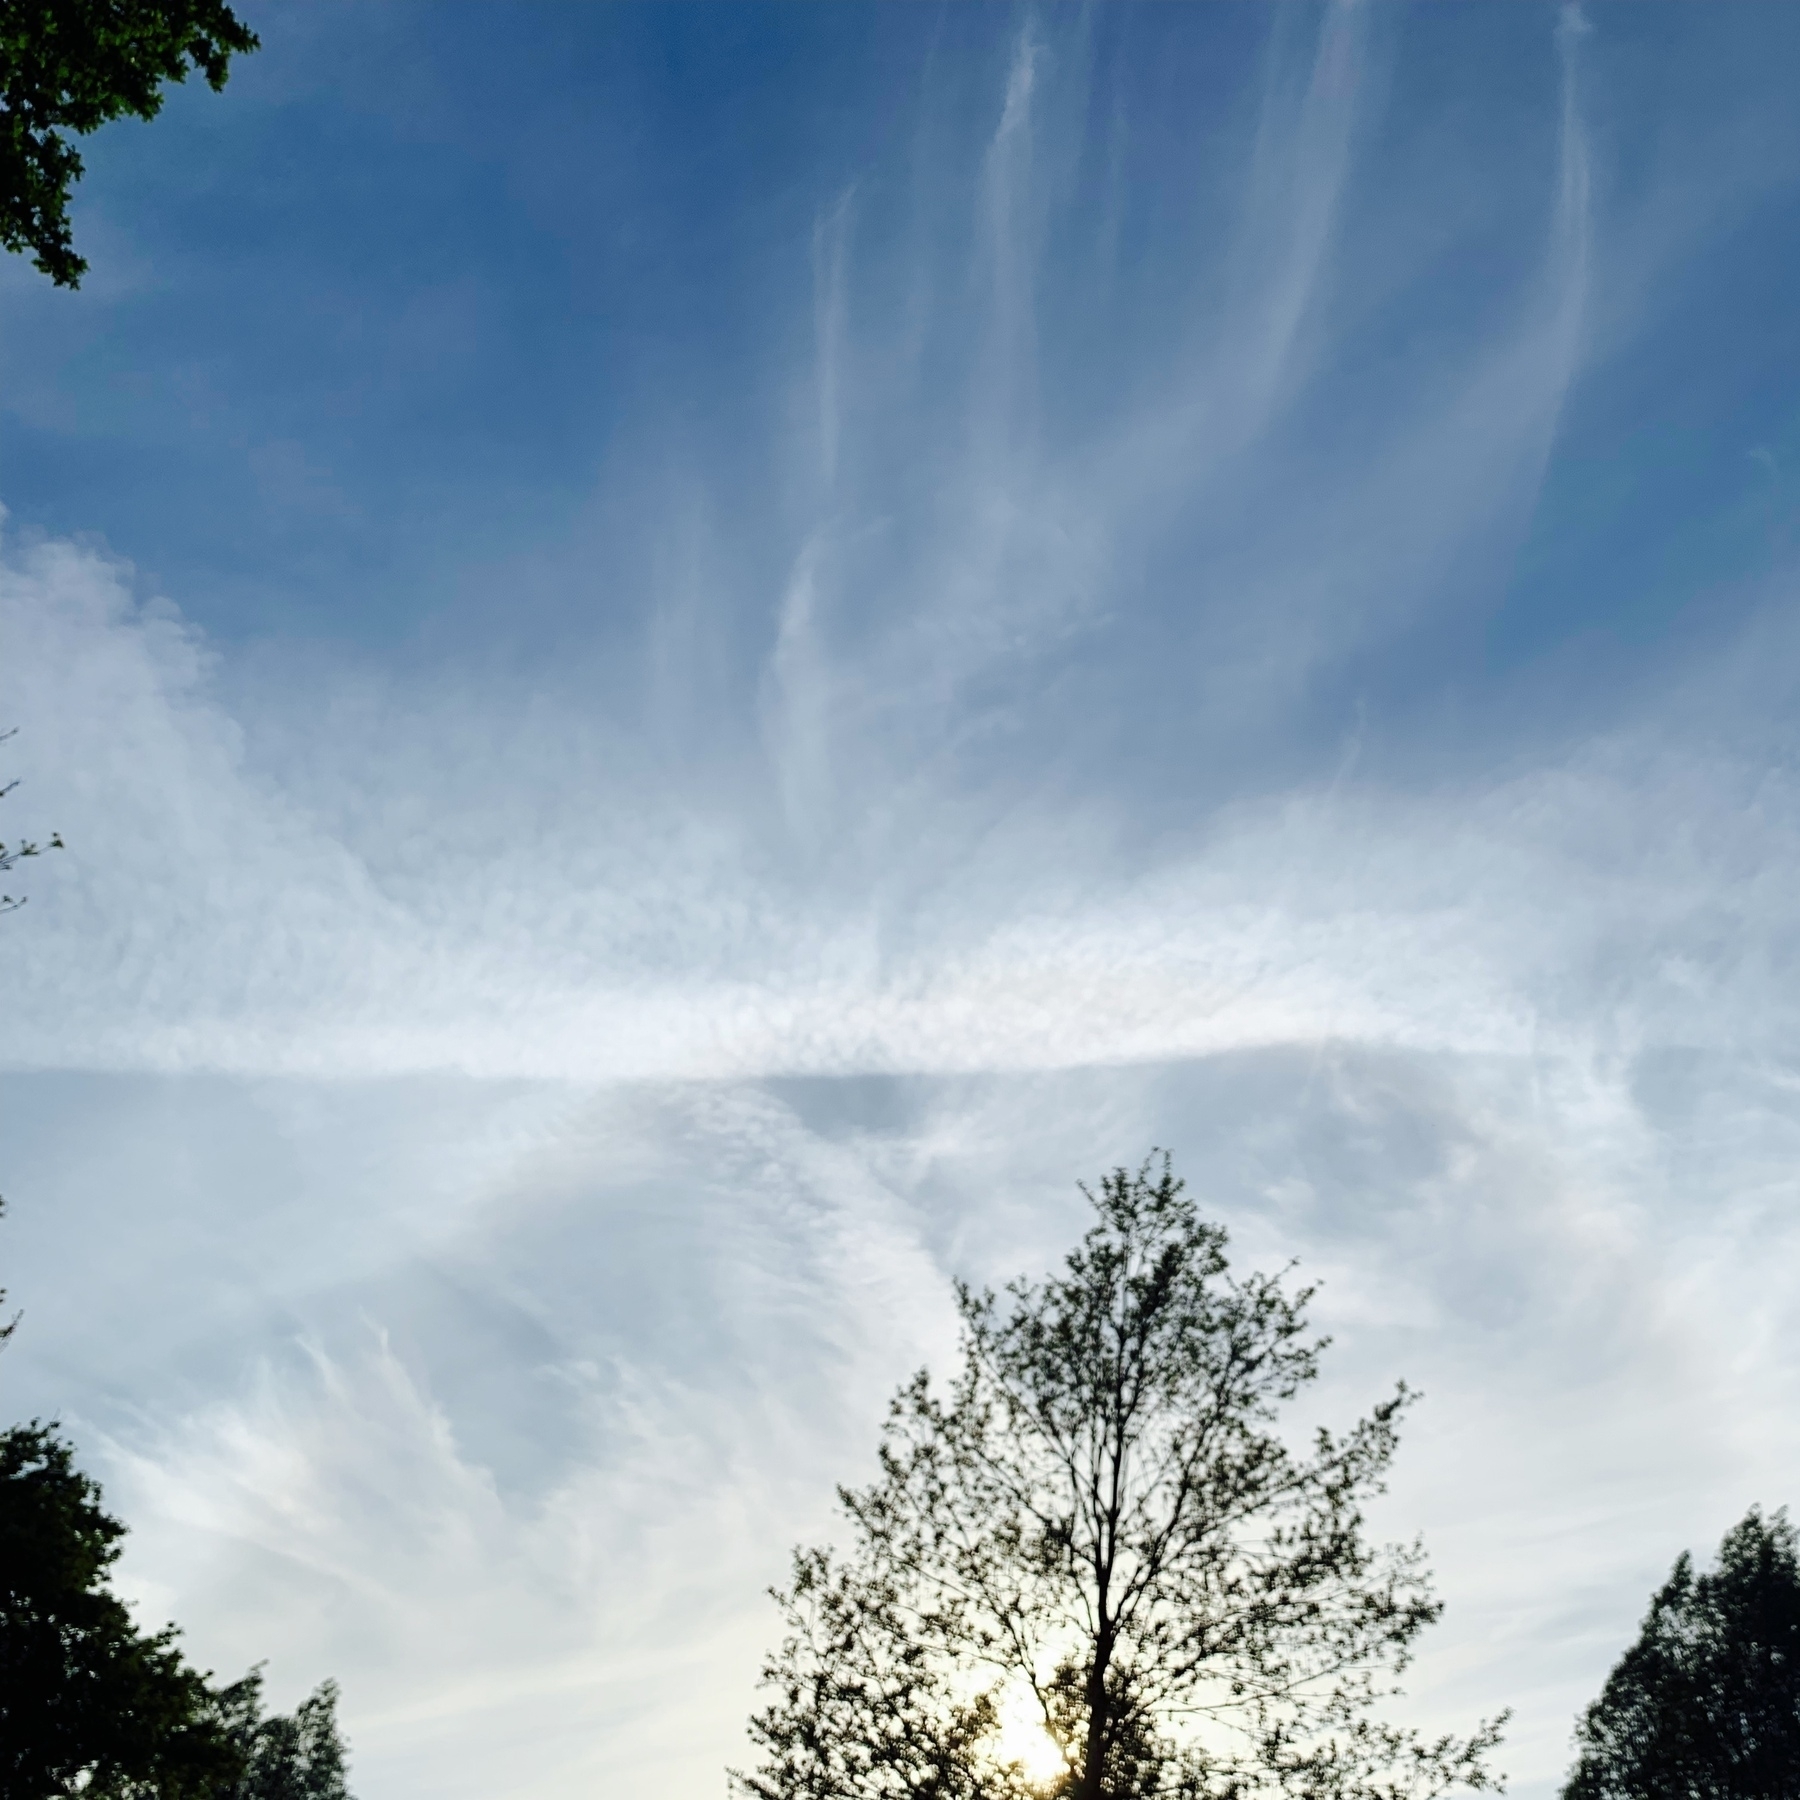 image shows wispy clouds and contrails againt the silhouette of trees and a blue sky